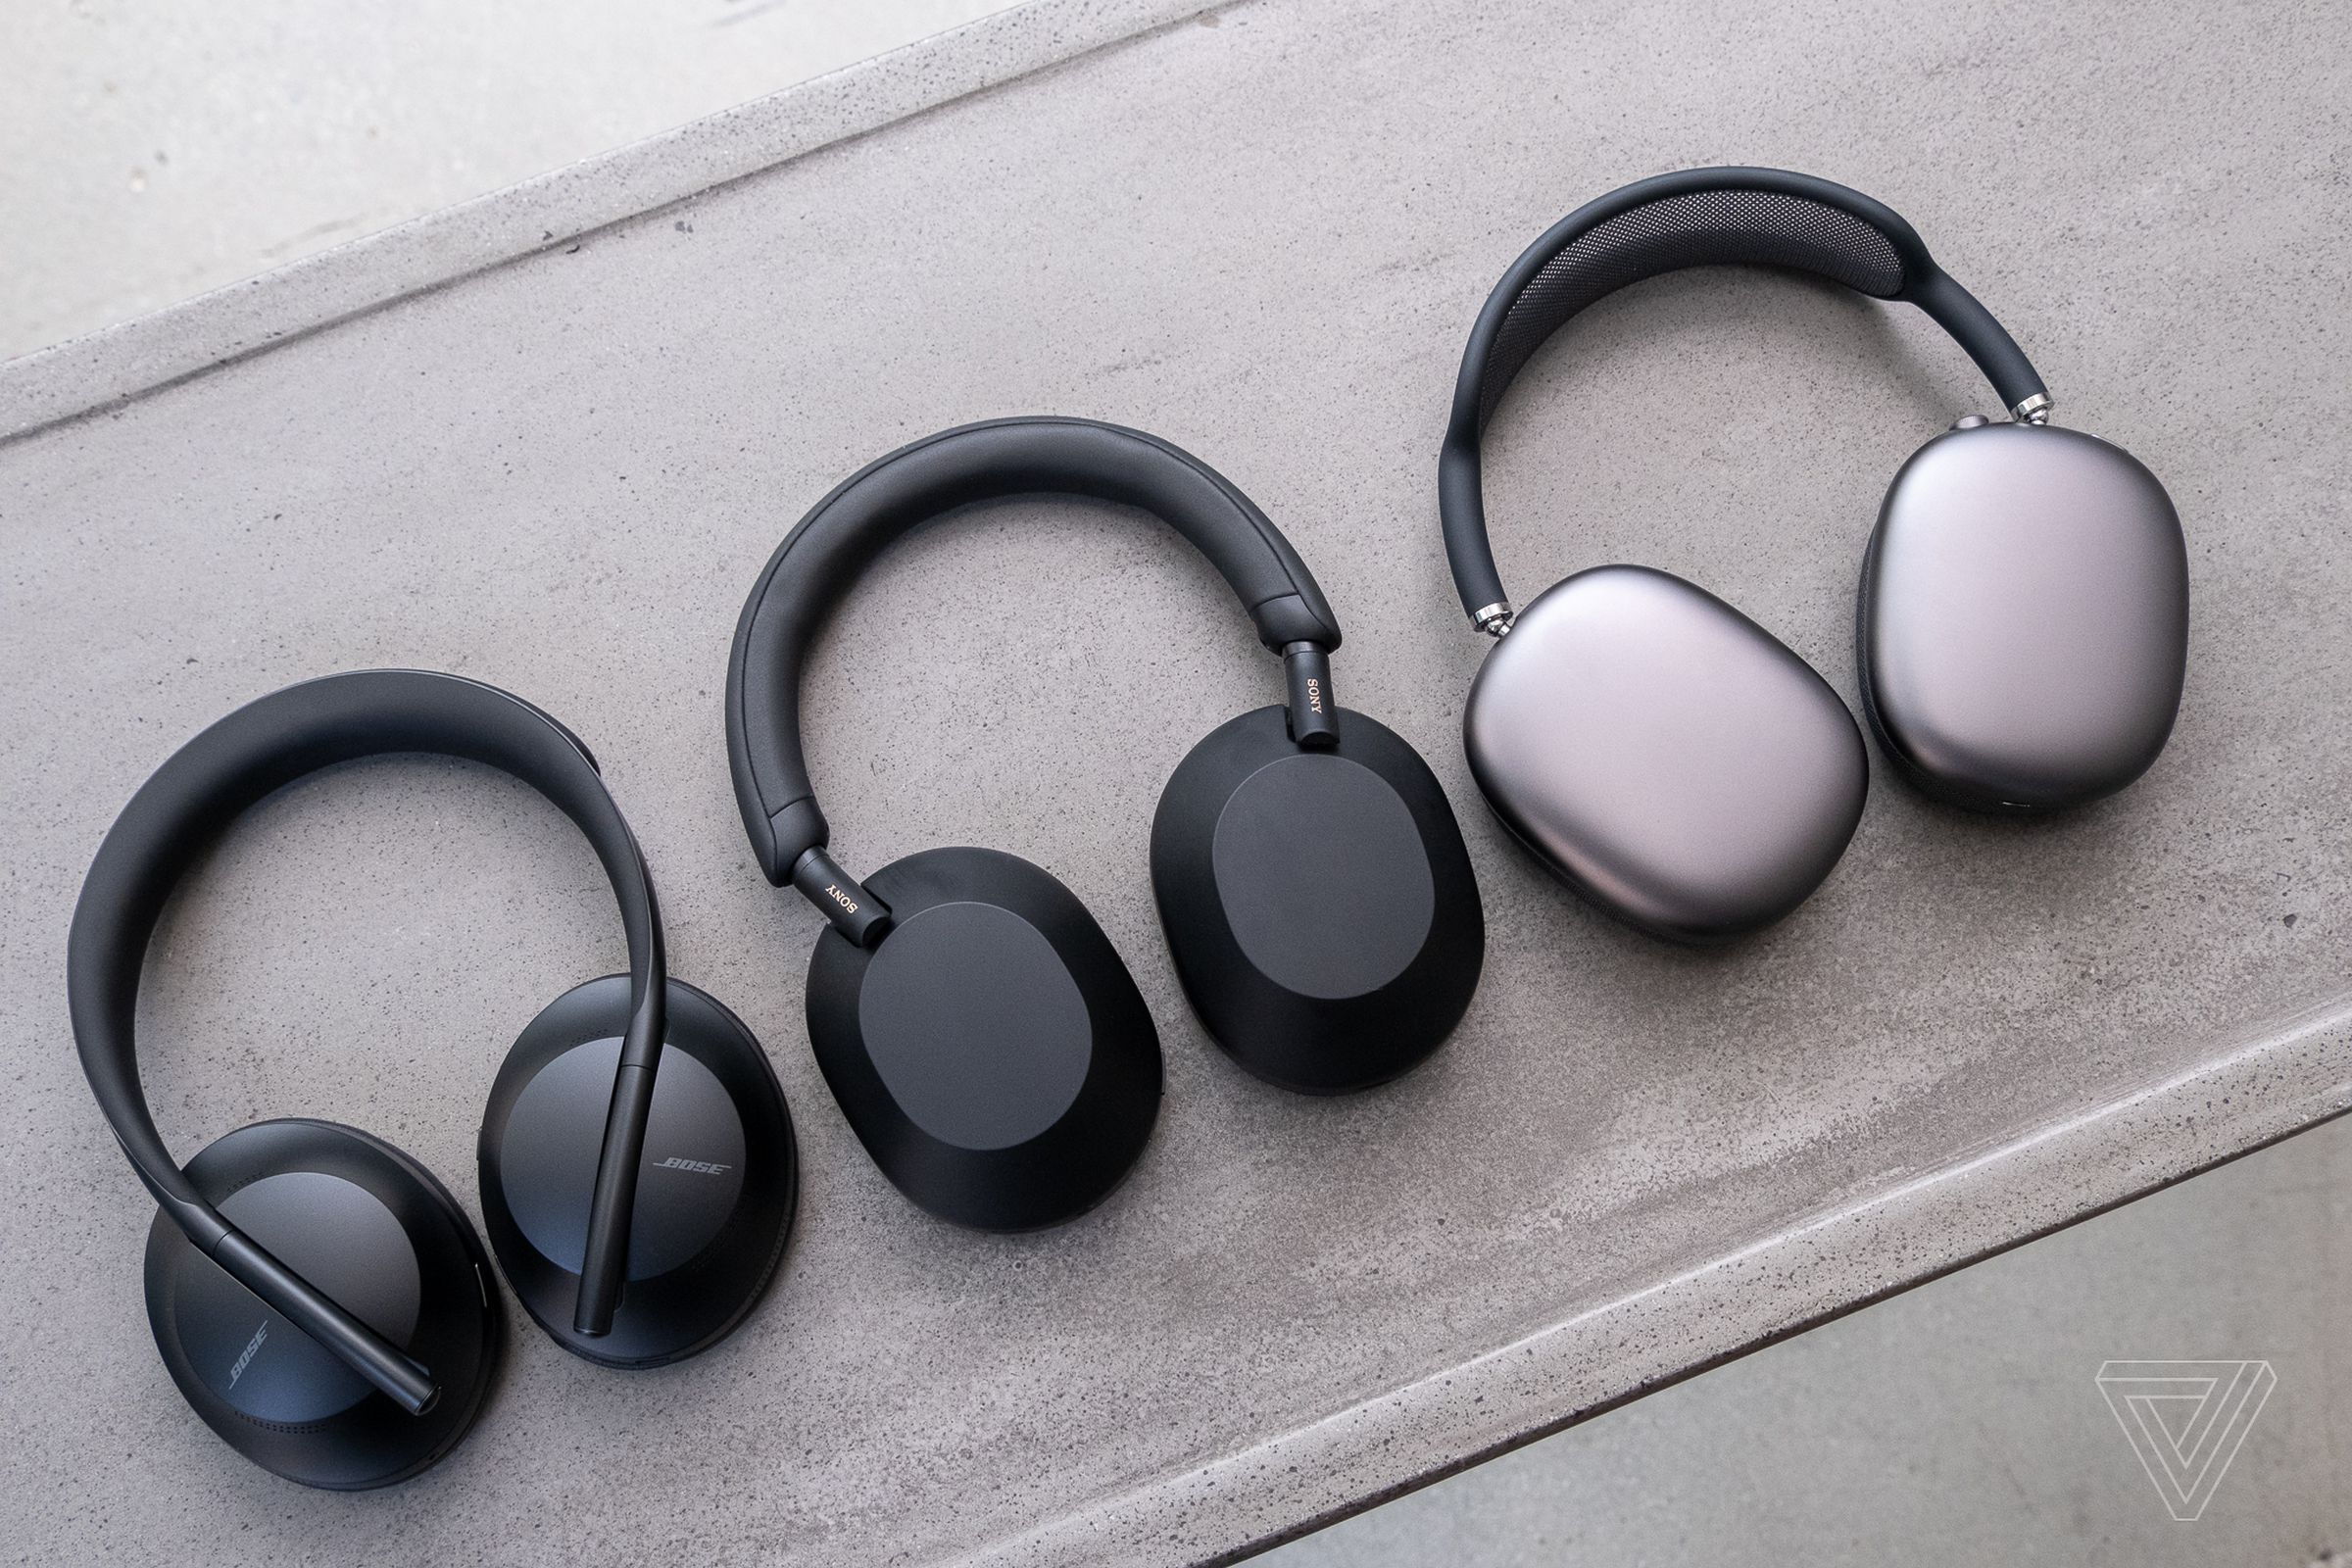 The 1000XM5s take after competitors like Bose’s Noise Canceling Headphones 700 and Apple’s AirPods Max.